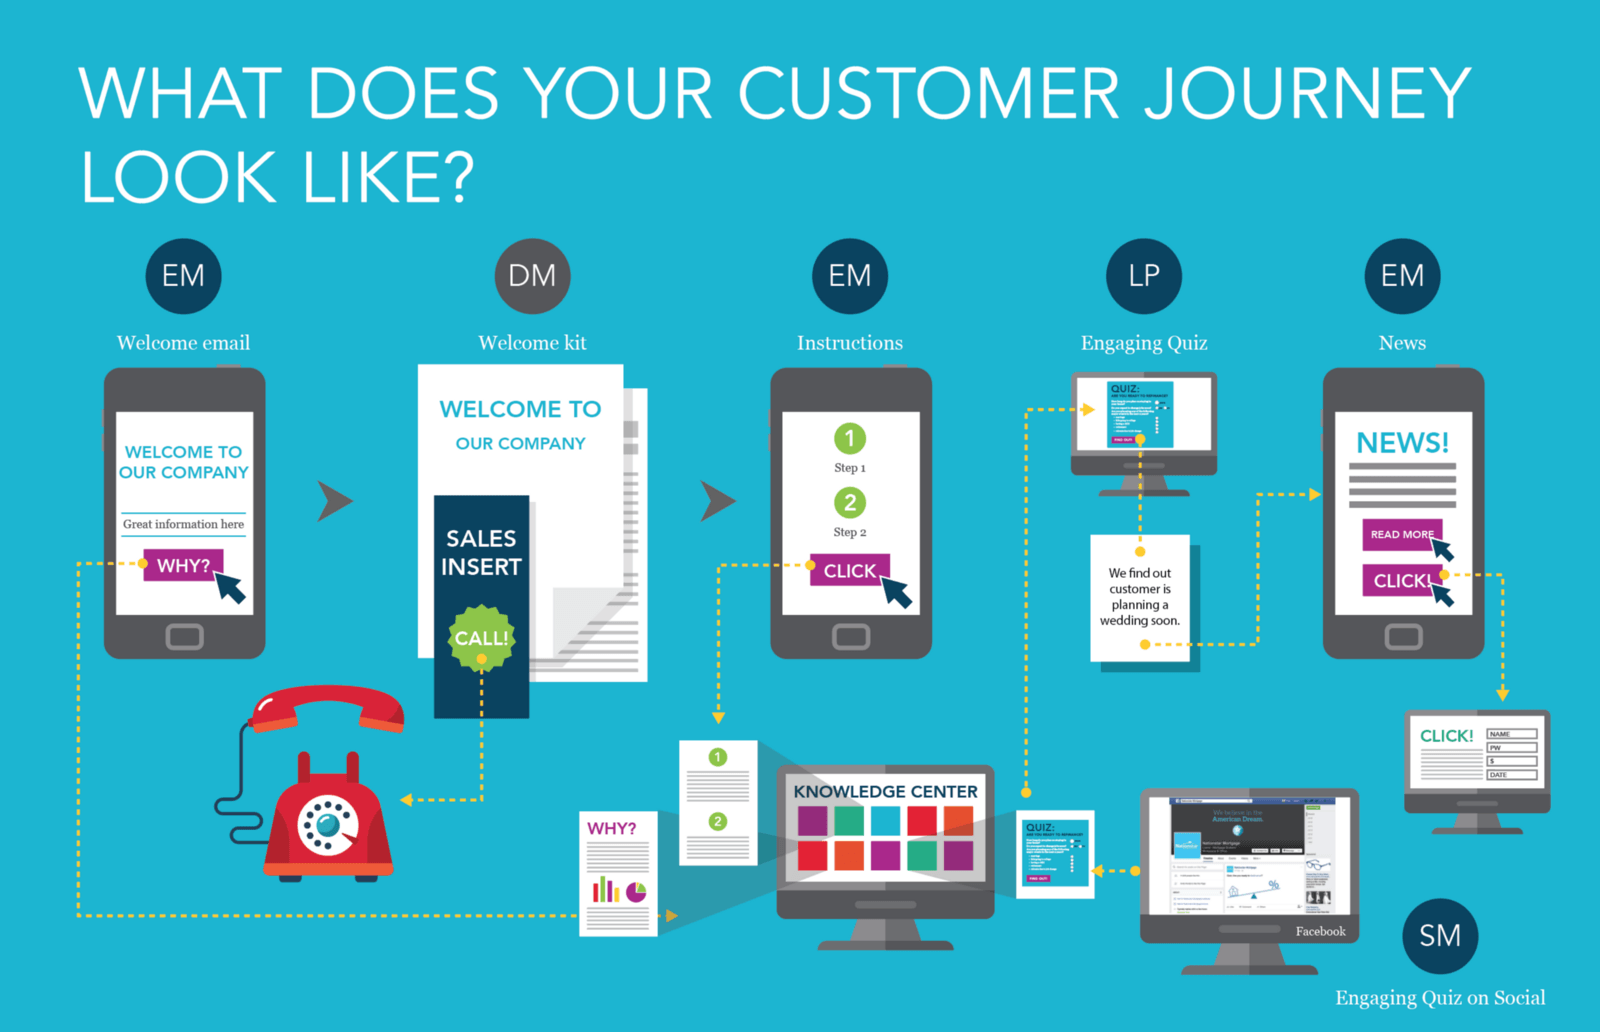 Direct quiz. Journey UI. Journey mobile app. Customer Journey along with Touchpoints.